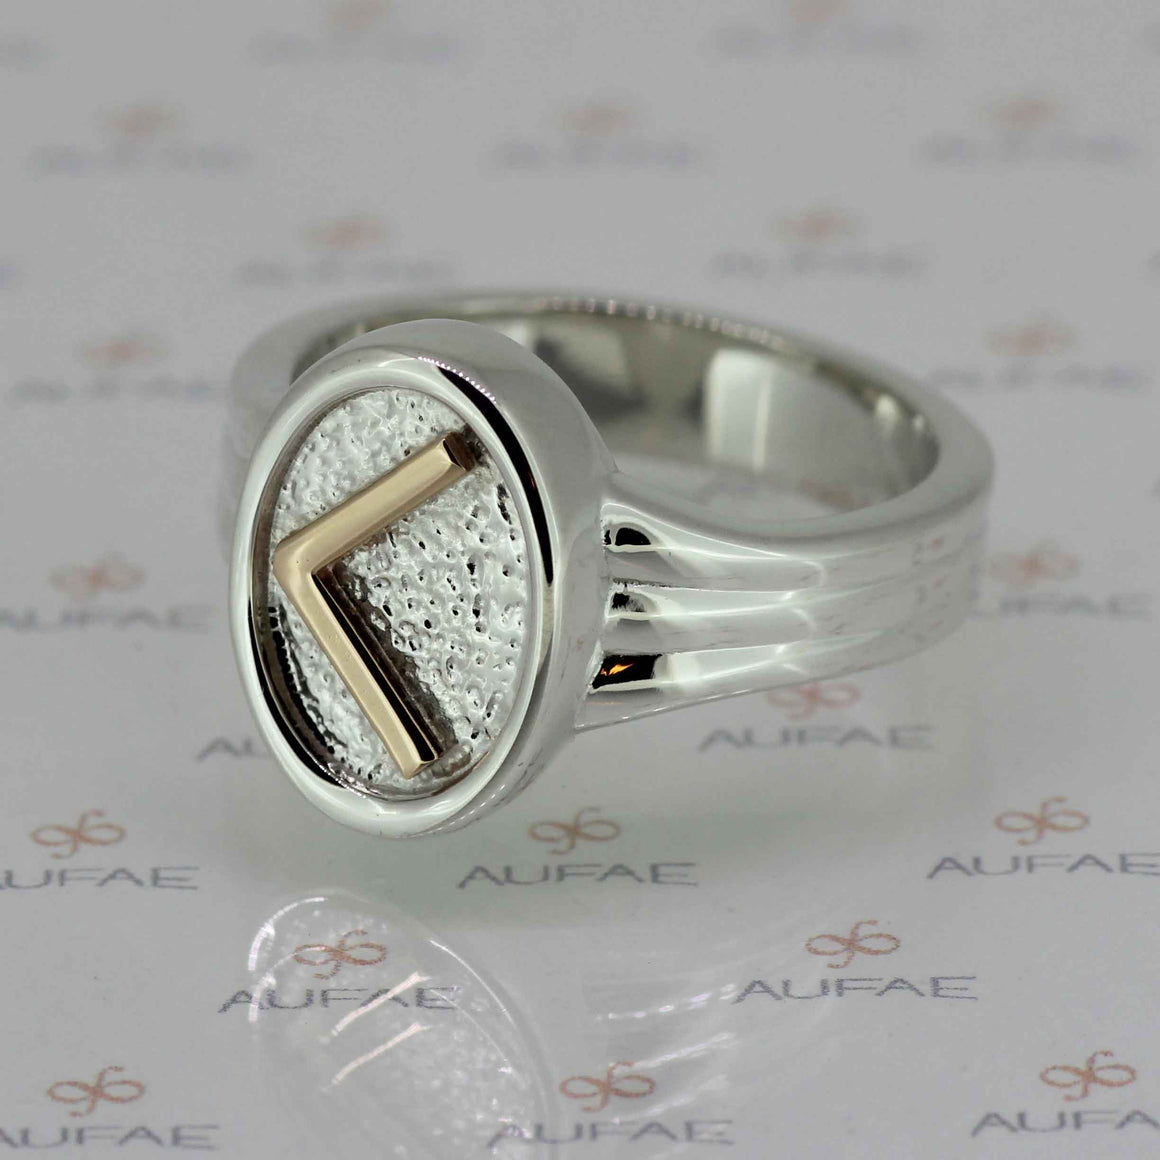 Aufae Kaunan (Kenaz) Rune ring in solid Sterling Silver with gold rune